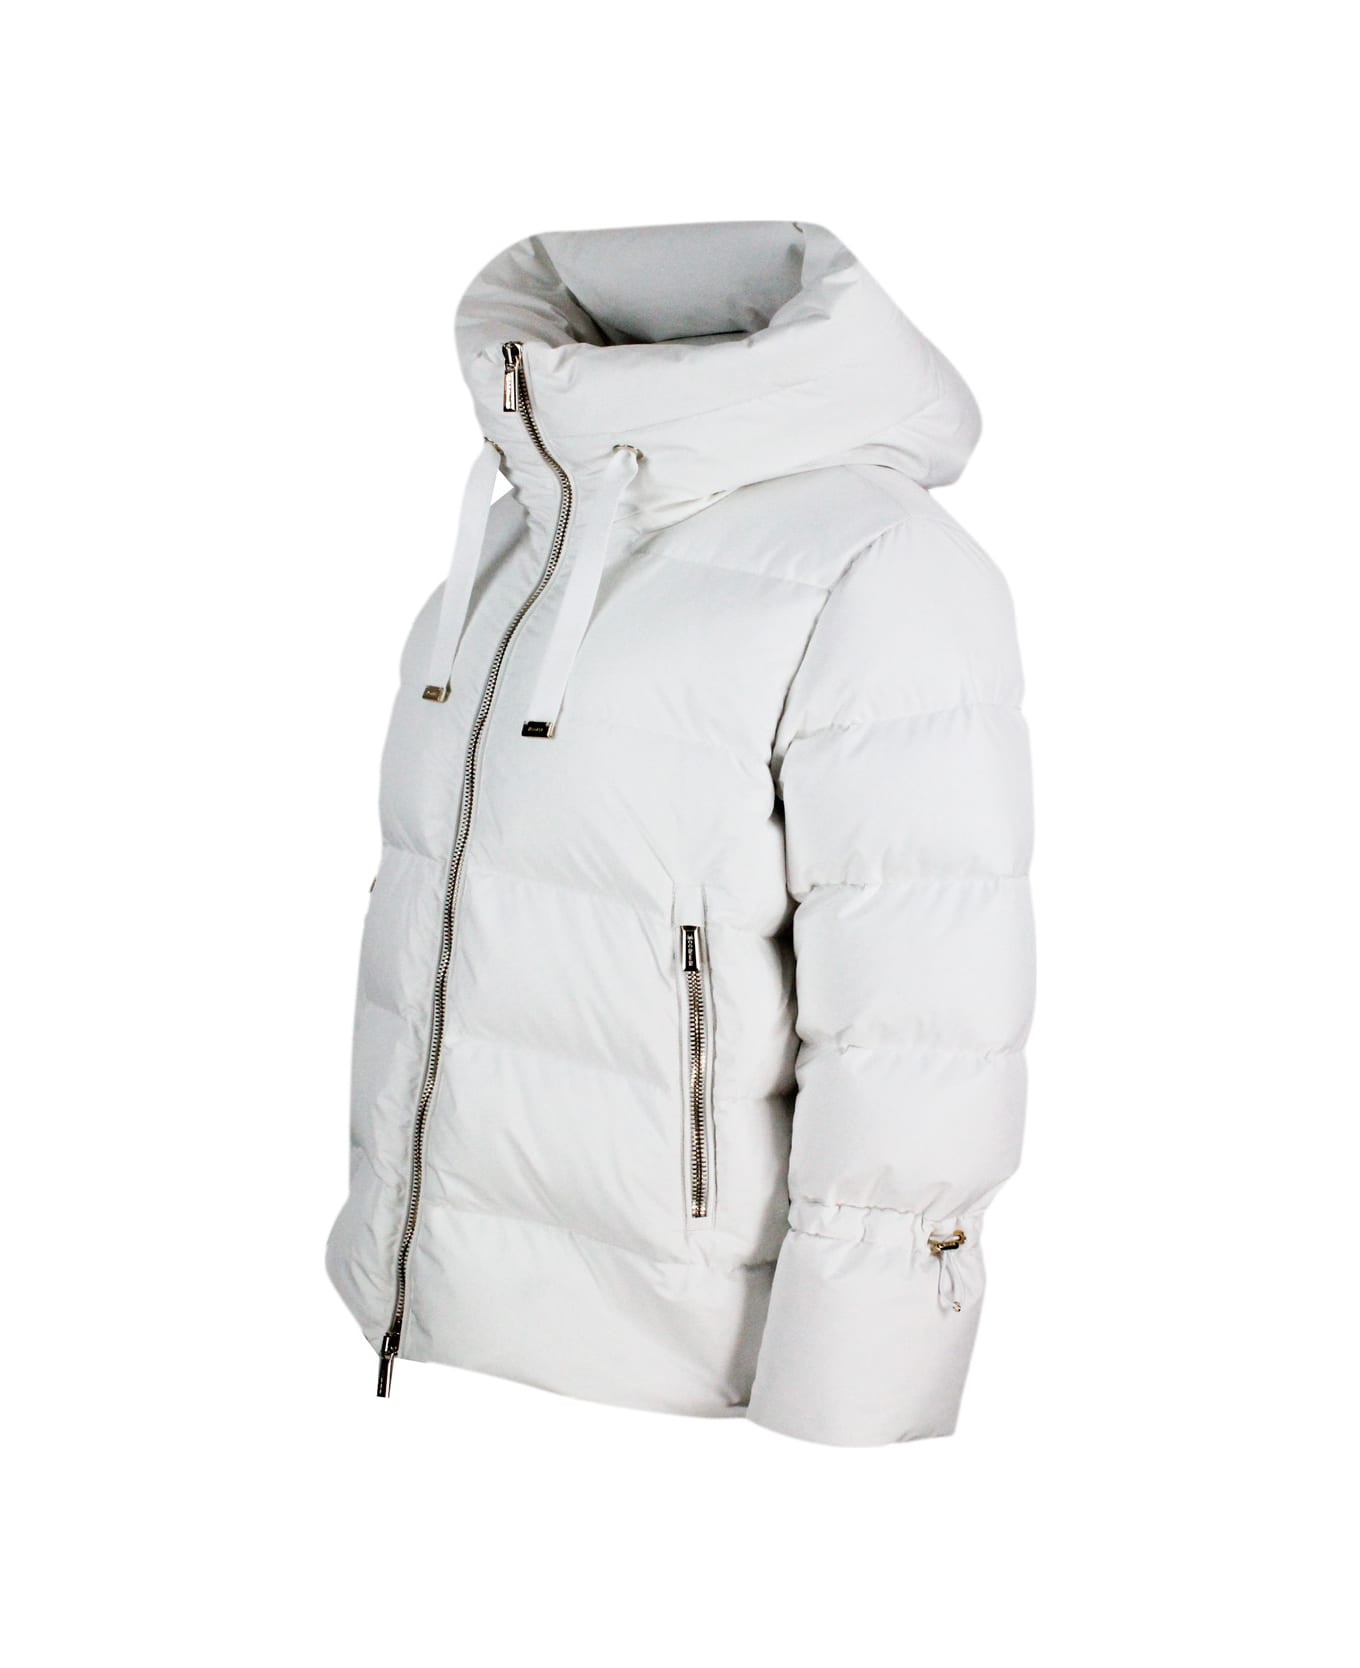 Moorer Down Jacket Made Of Opaque Technical Fabric Padded With Real Goose Down With Hood With Drawstring. - White